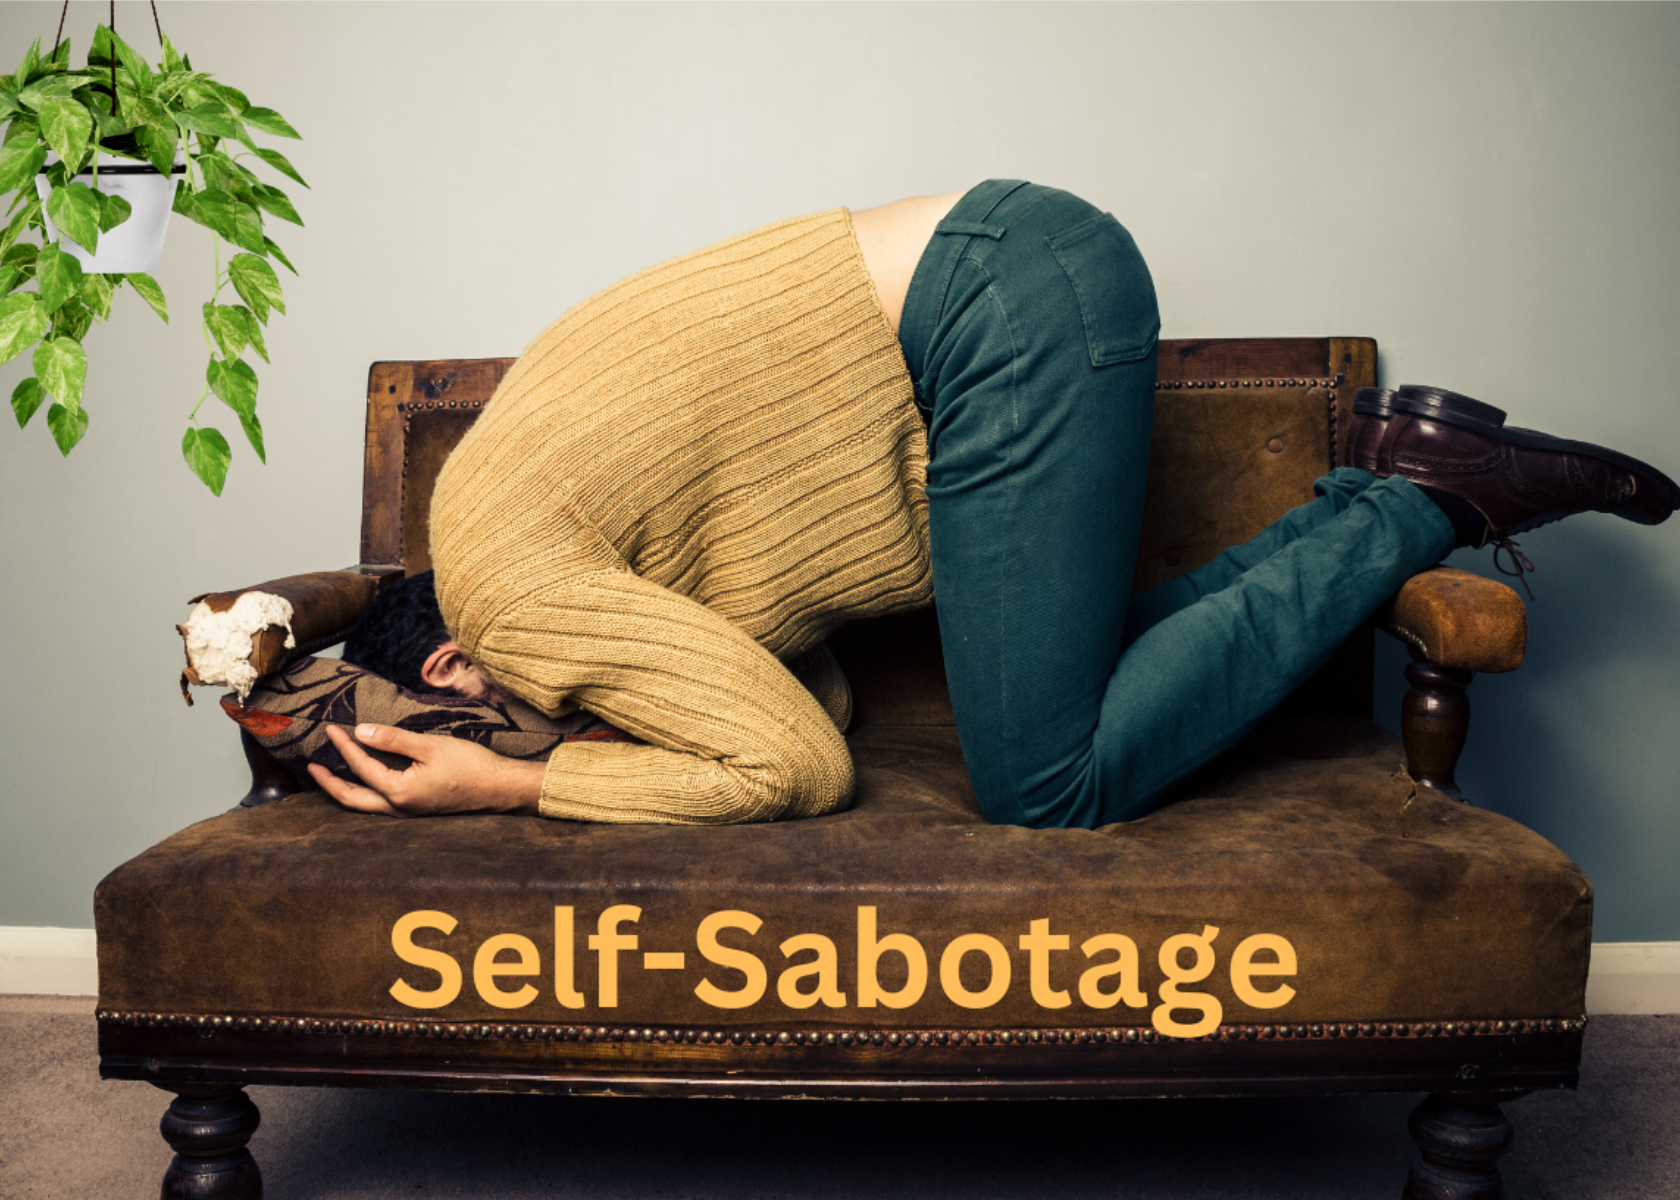 Why Women Self-Sabotage and How to Overcome It